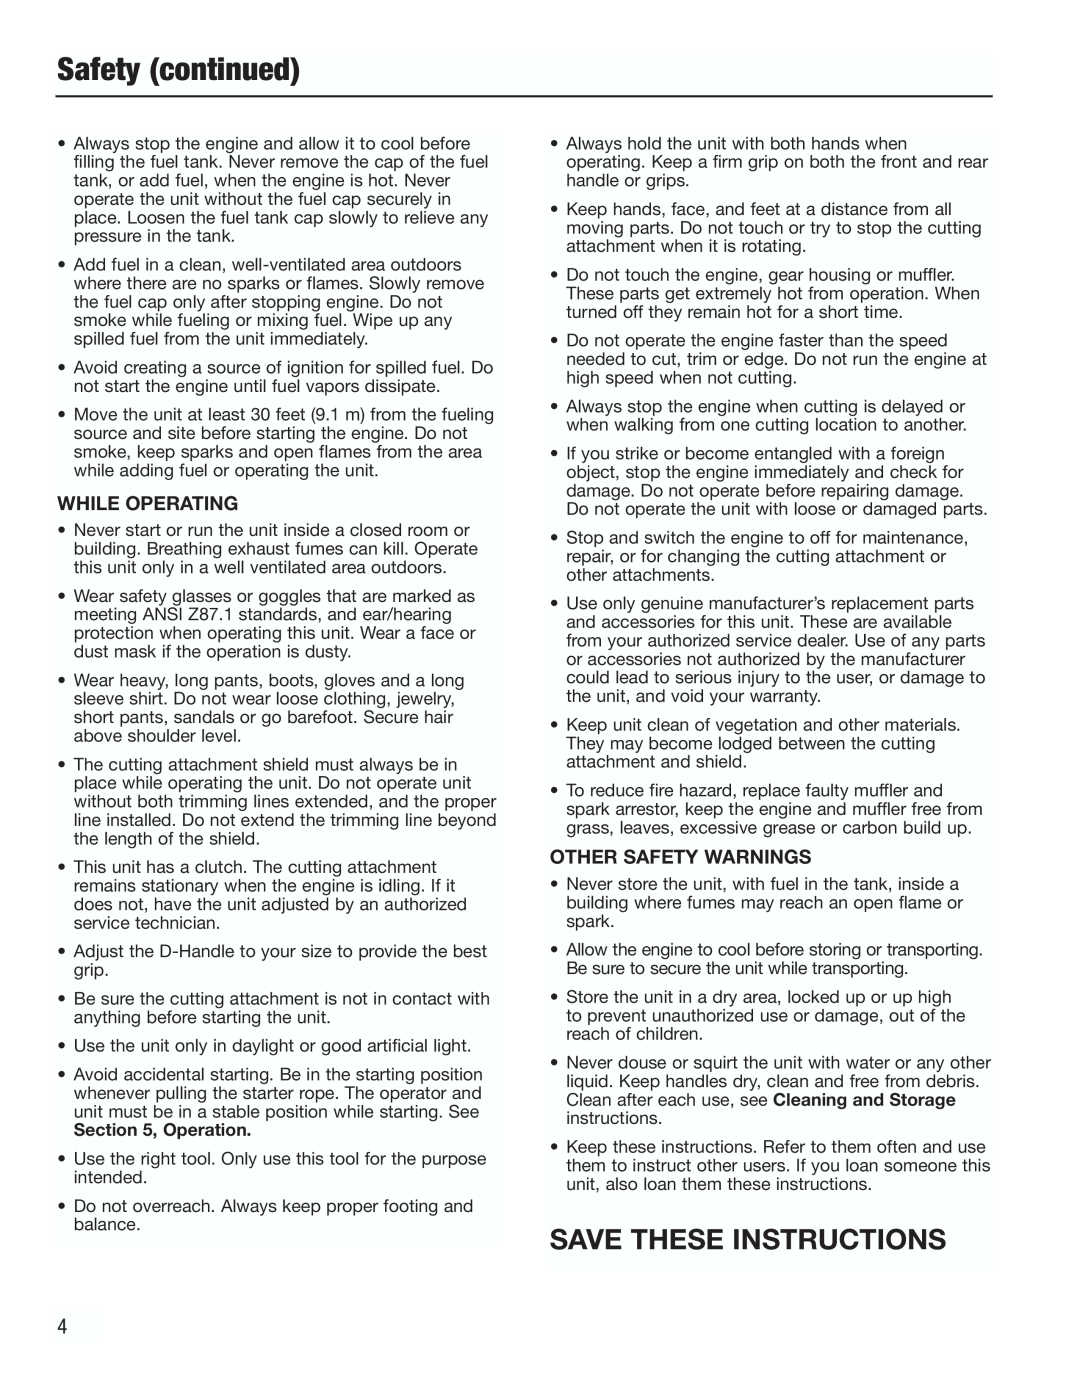 Cub Cadet CC3000 manual Safety continued, Save These Instructions, Operation 